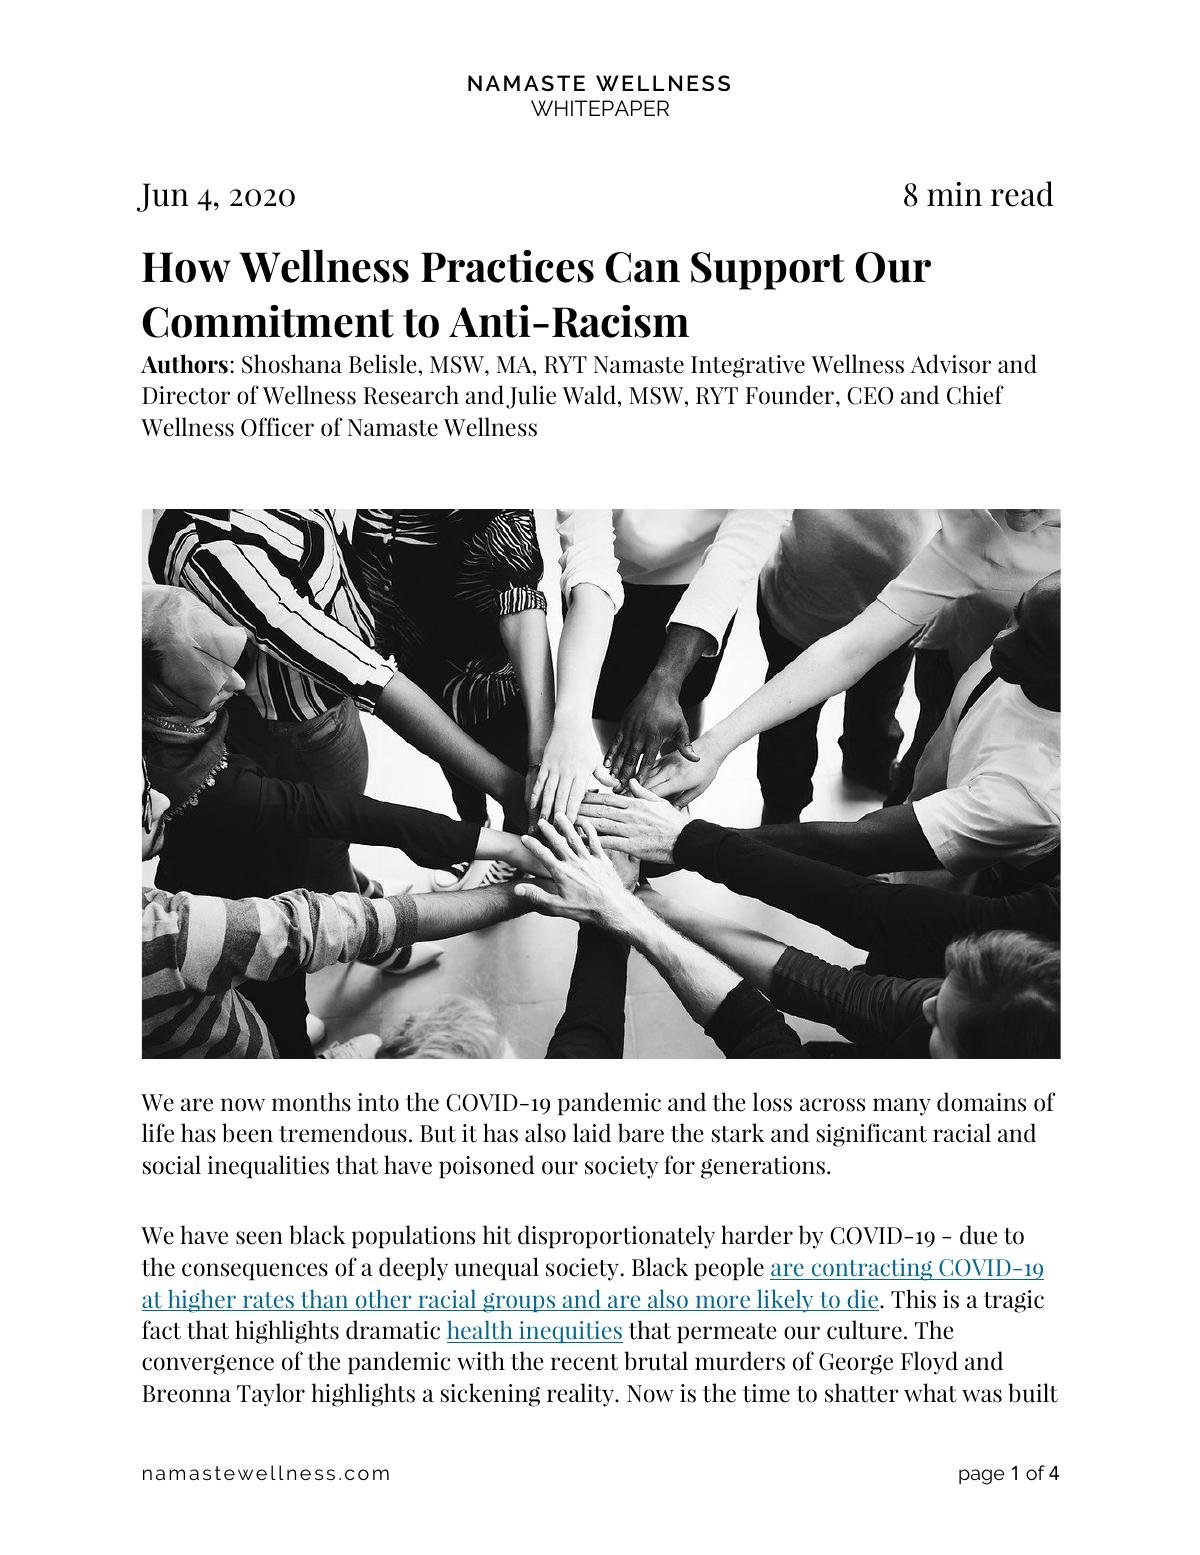 How Wellness Practices Can Support Our Commitment to Anti-Racism